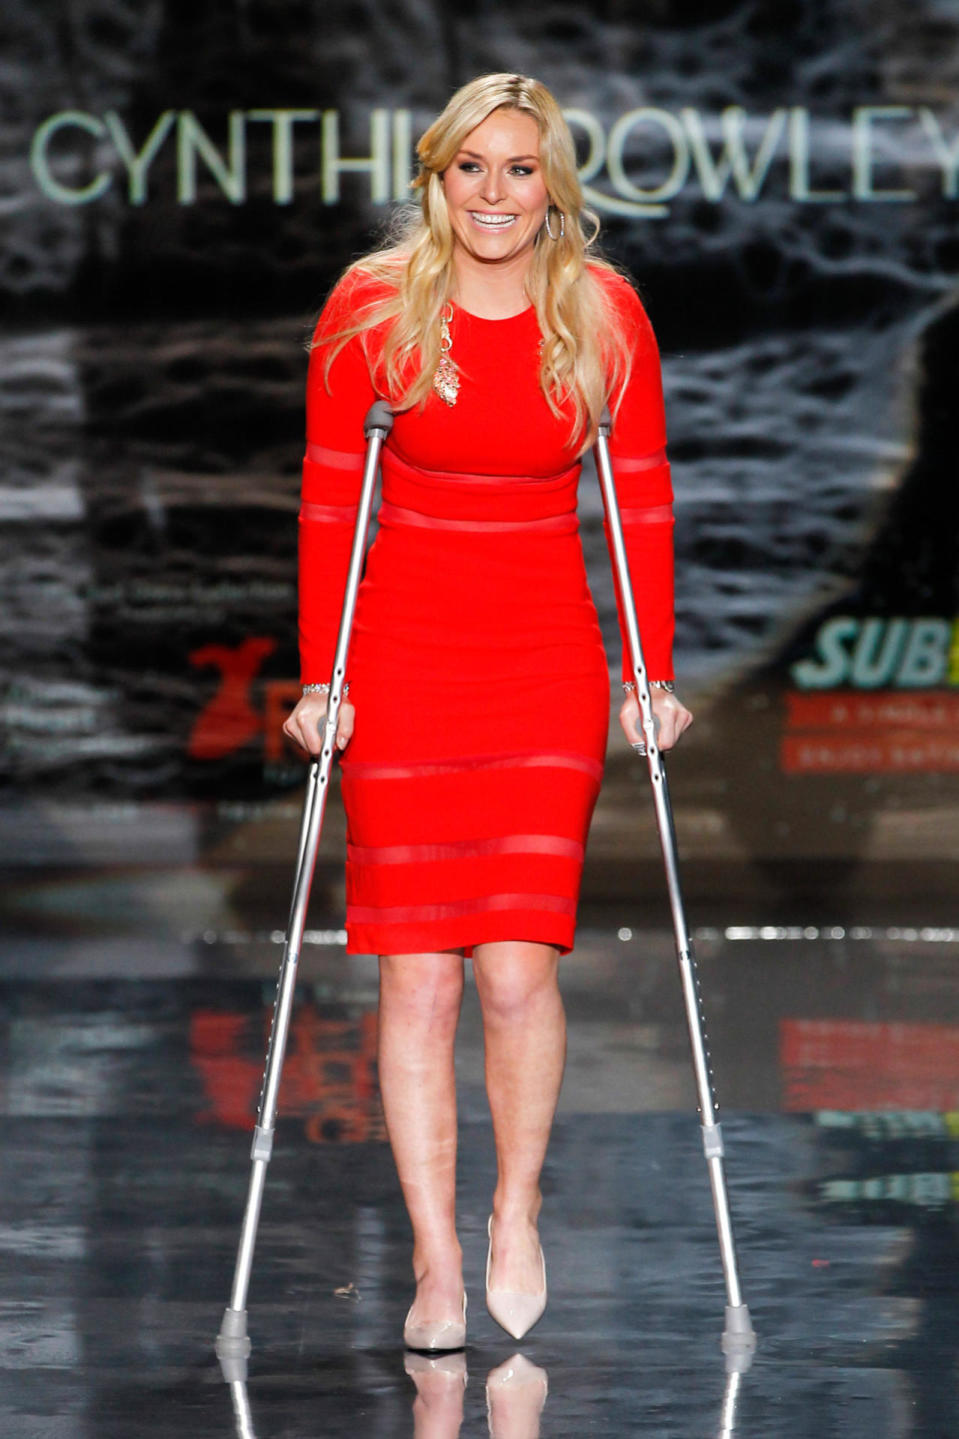 Lindsey Vonn hit the NYFW runway in a red dress and crutches